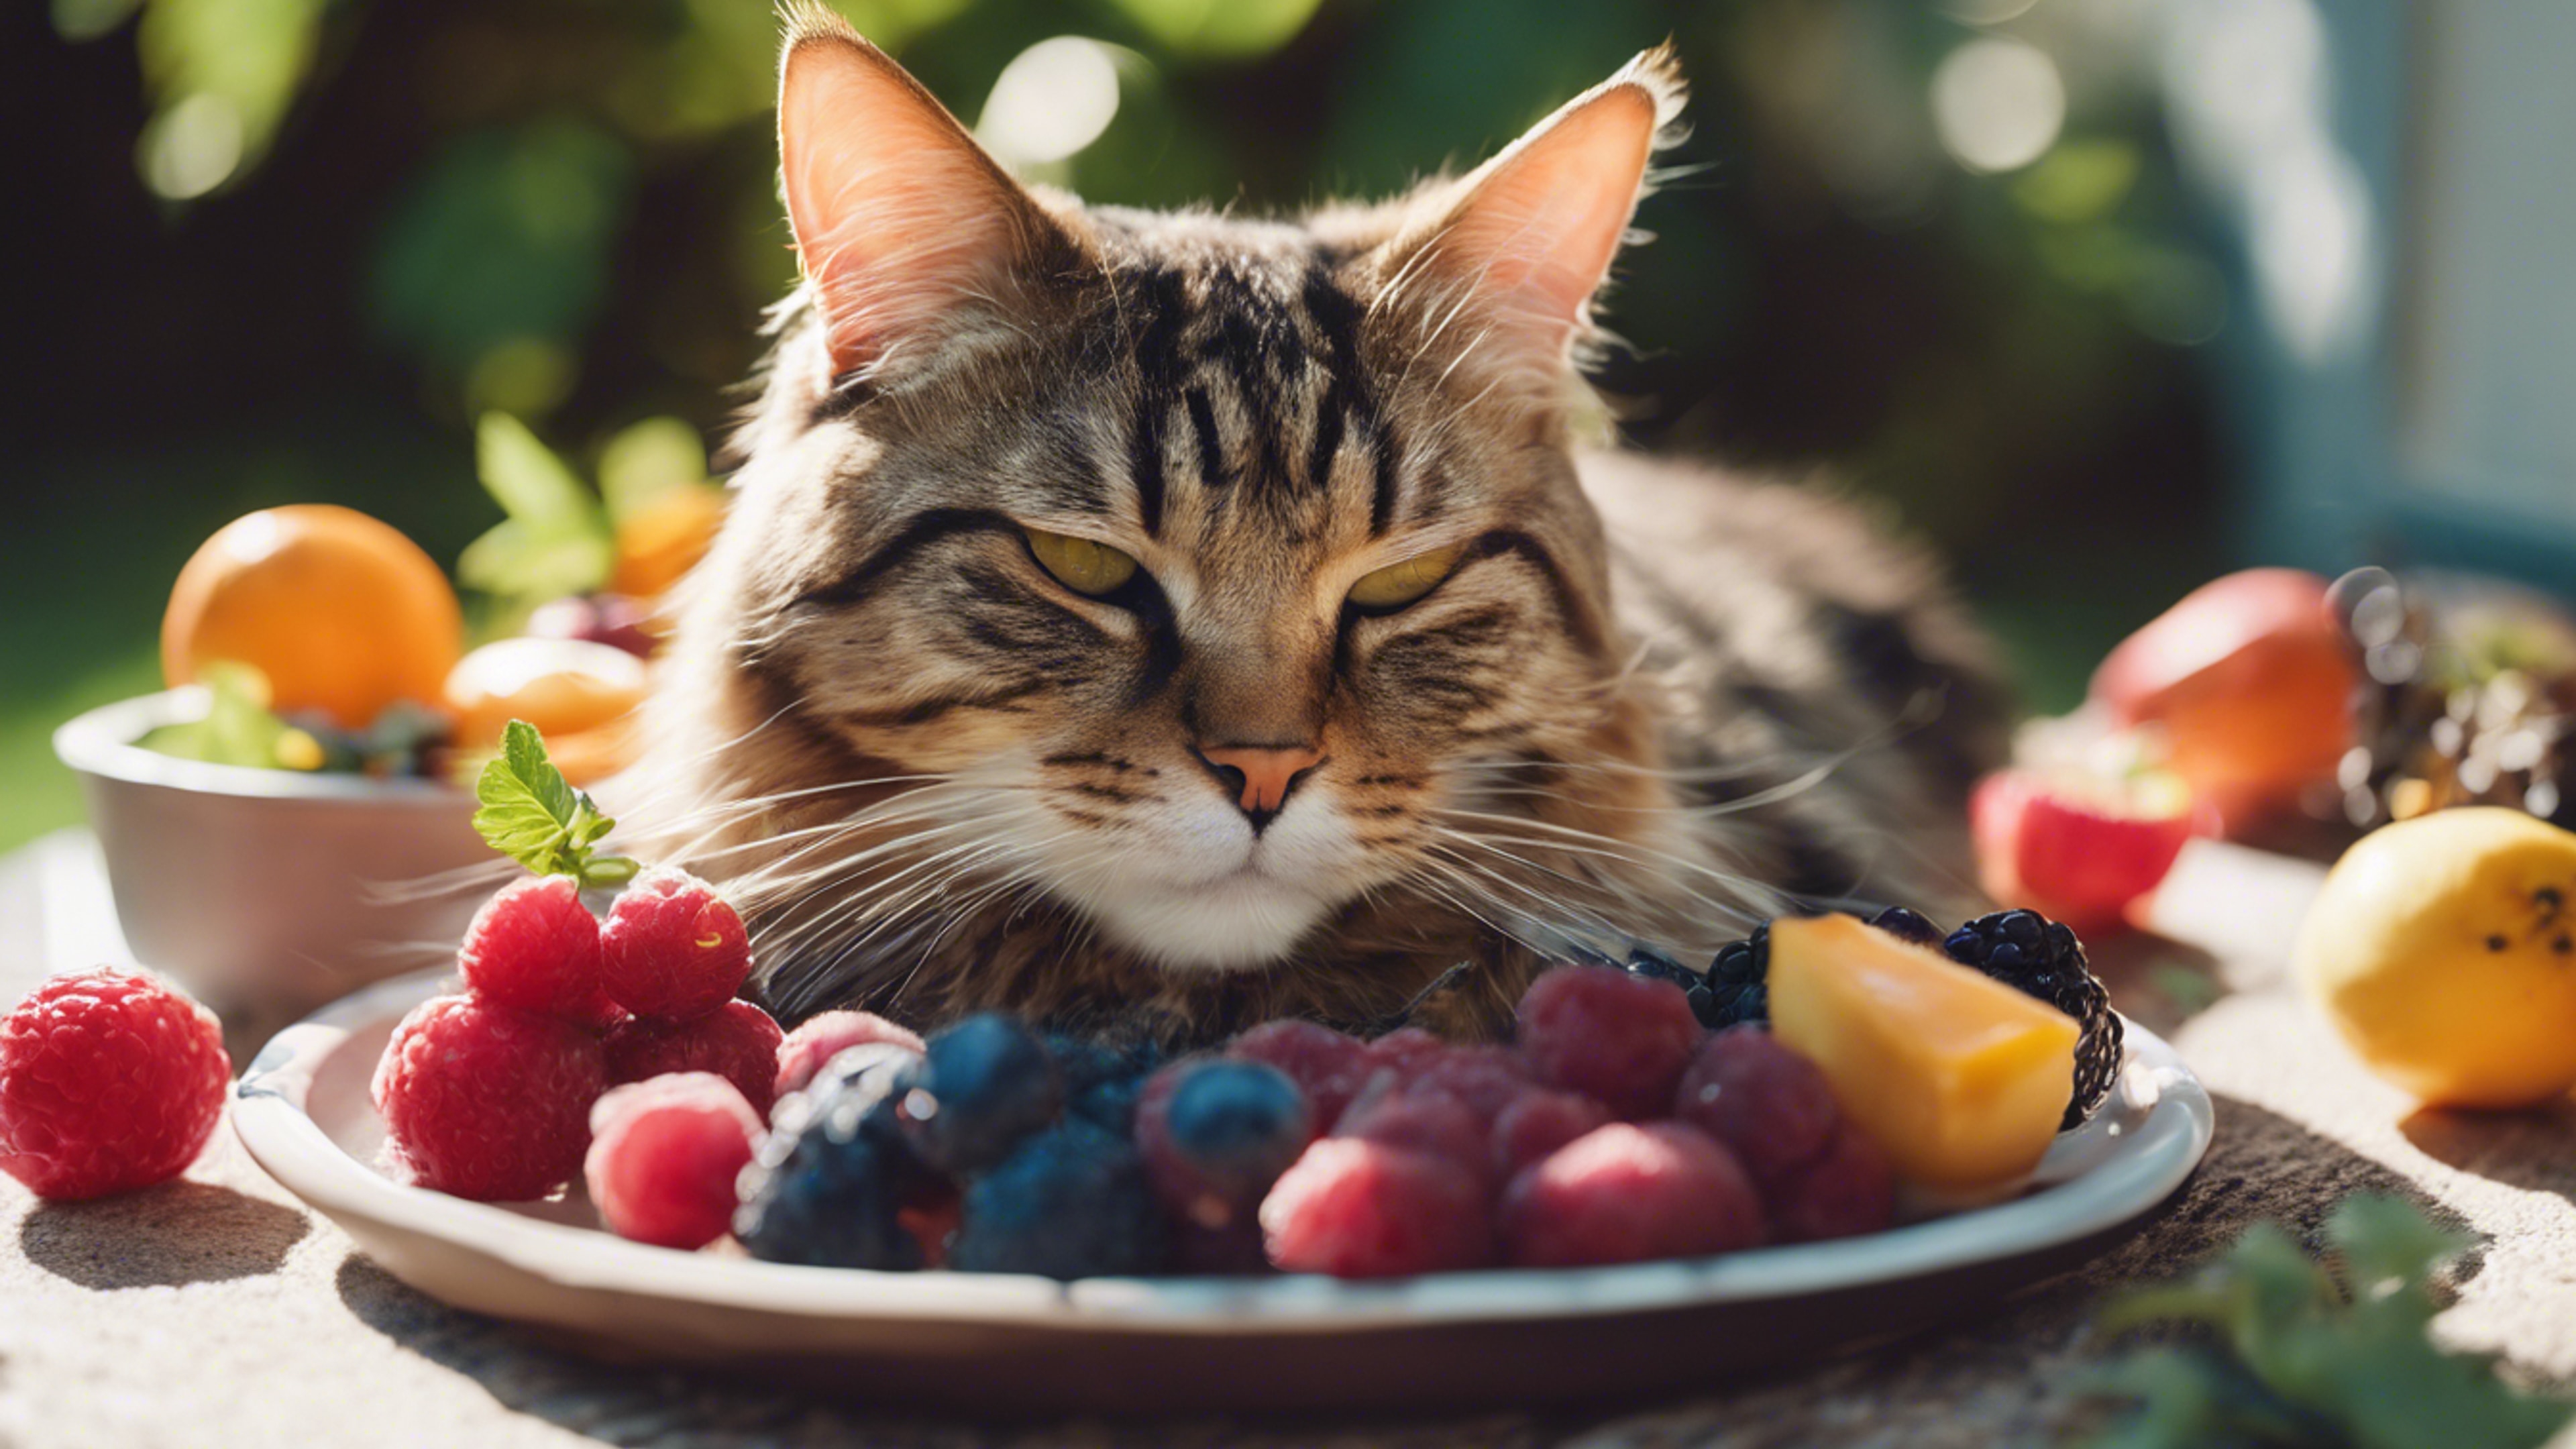 A sleepy Maine Coon cat relaxing next to a bowl of vibrant summer fruits. 墙纸[5a3905f0581c45108121]